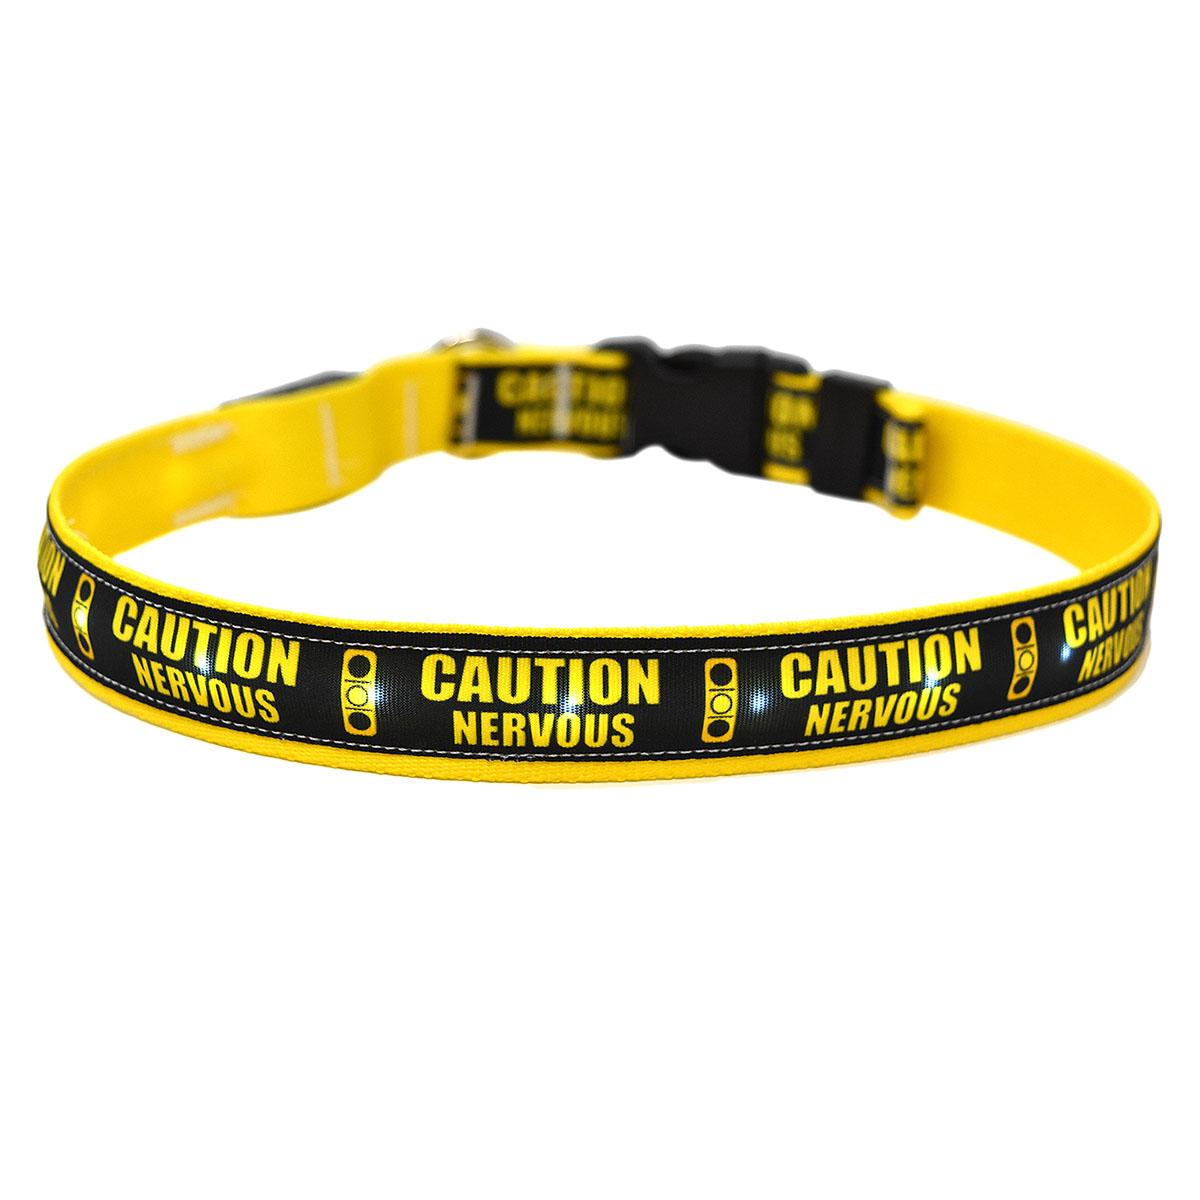 Caution Nervous Traffic Light ORION LED Dog Collar by Yellow Dog